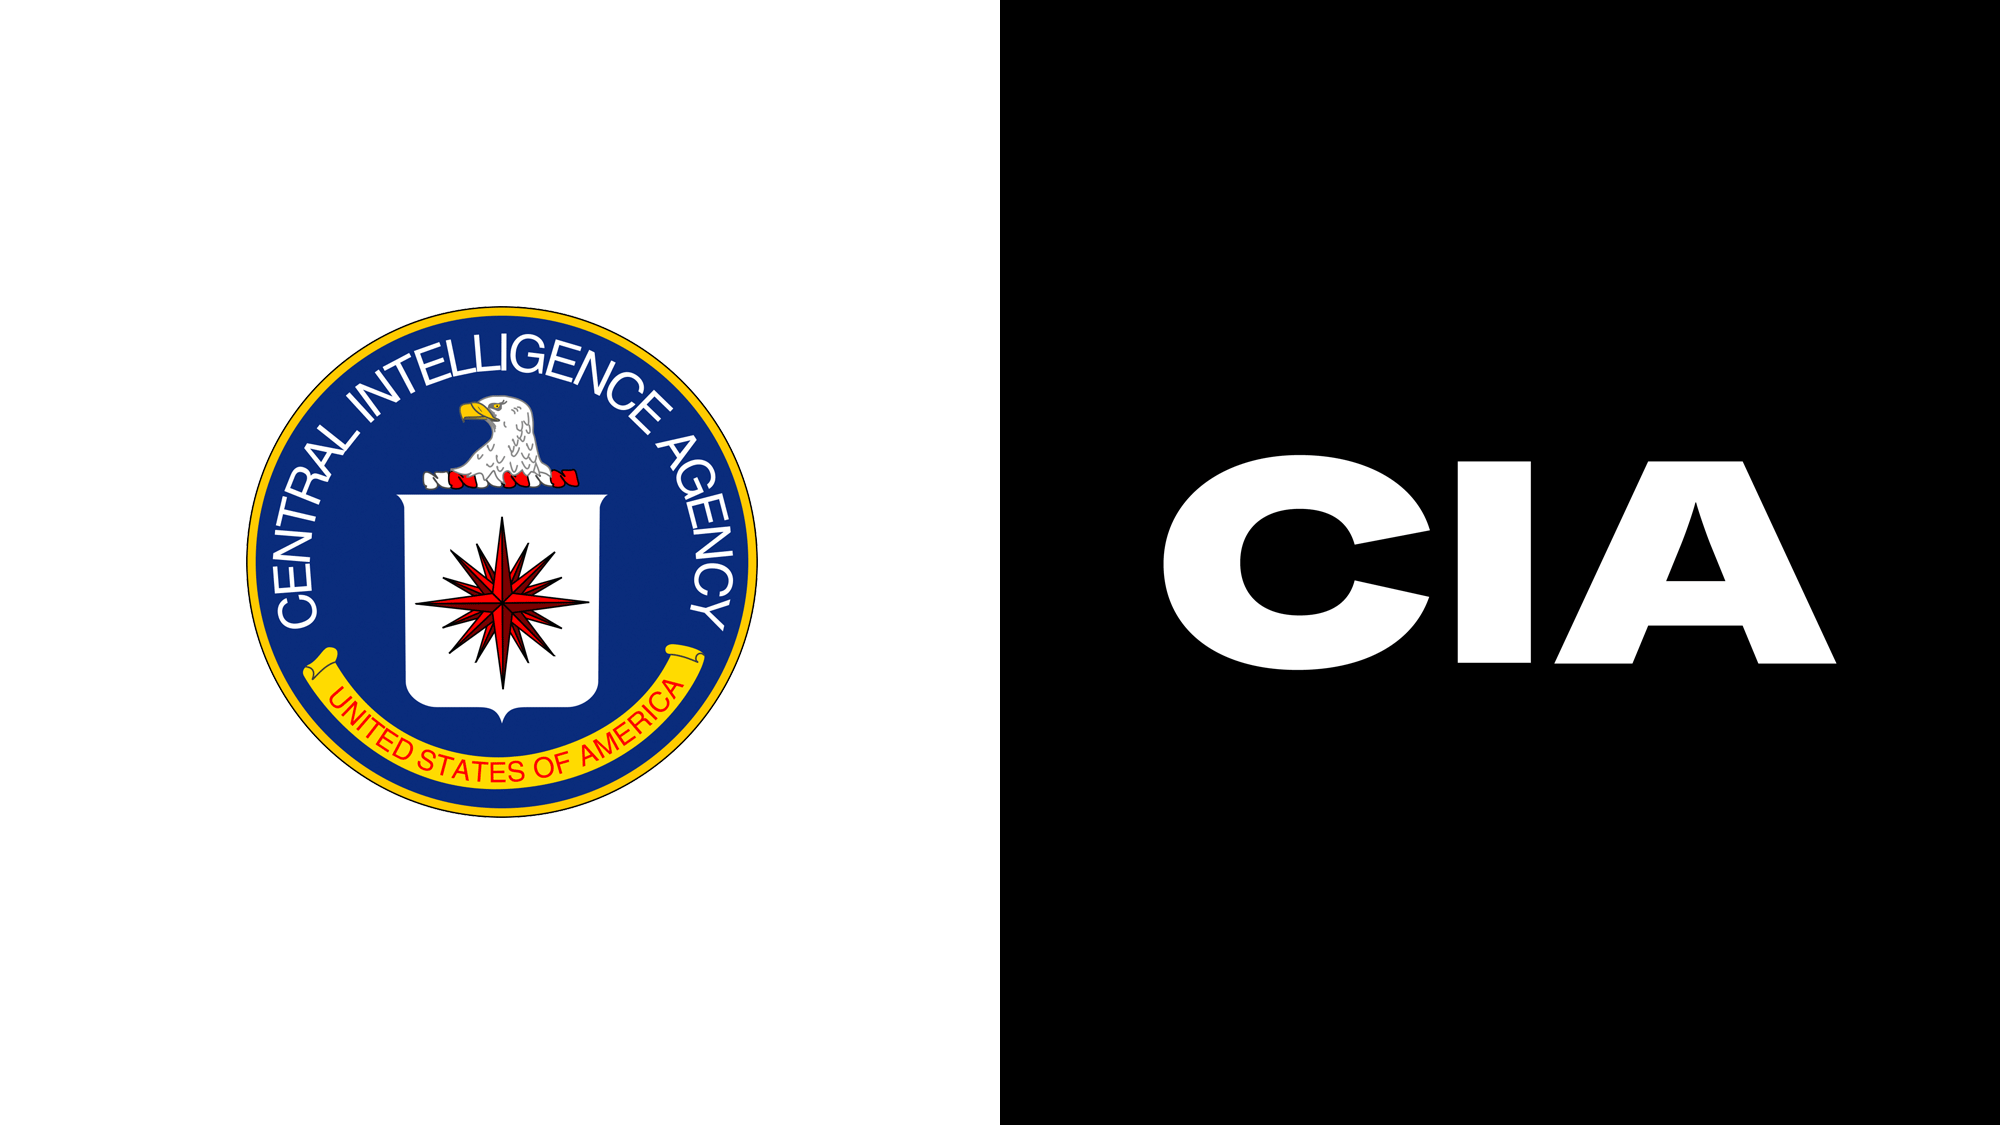 New Logo and Identity (or is it?) for the CIA